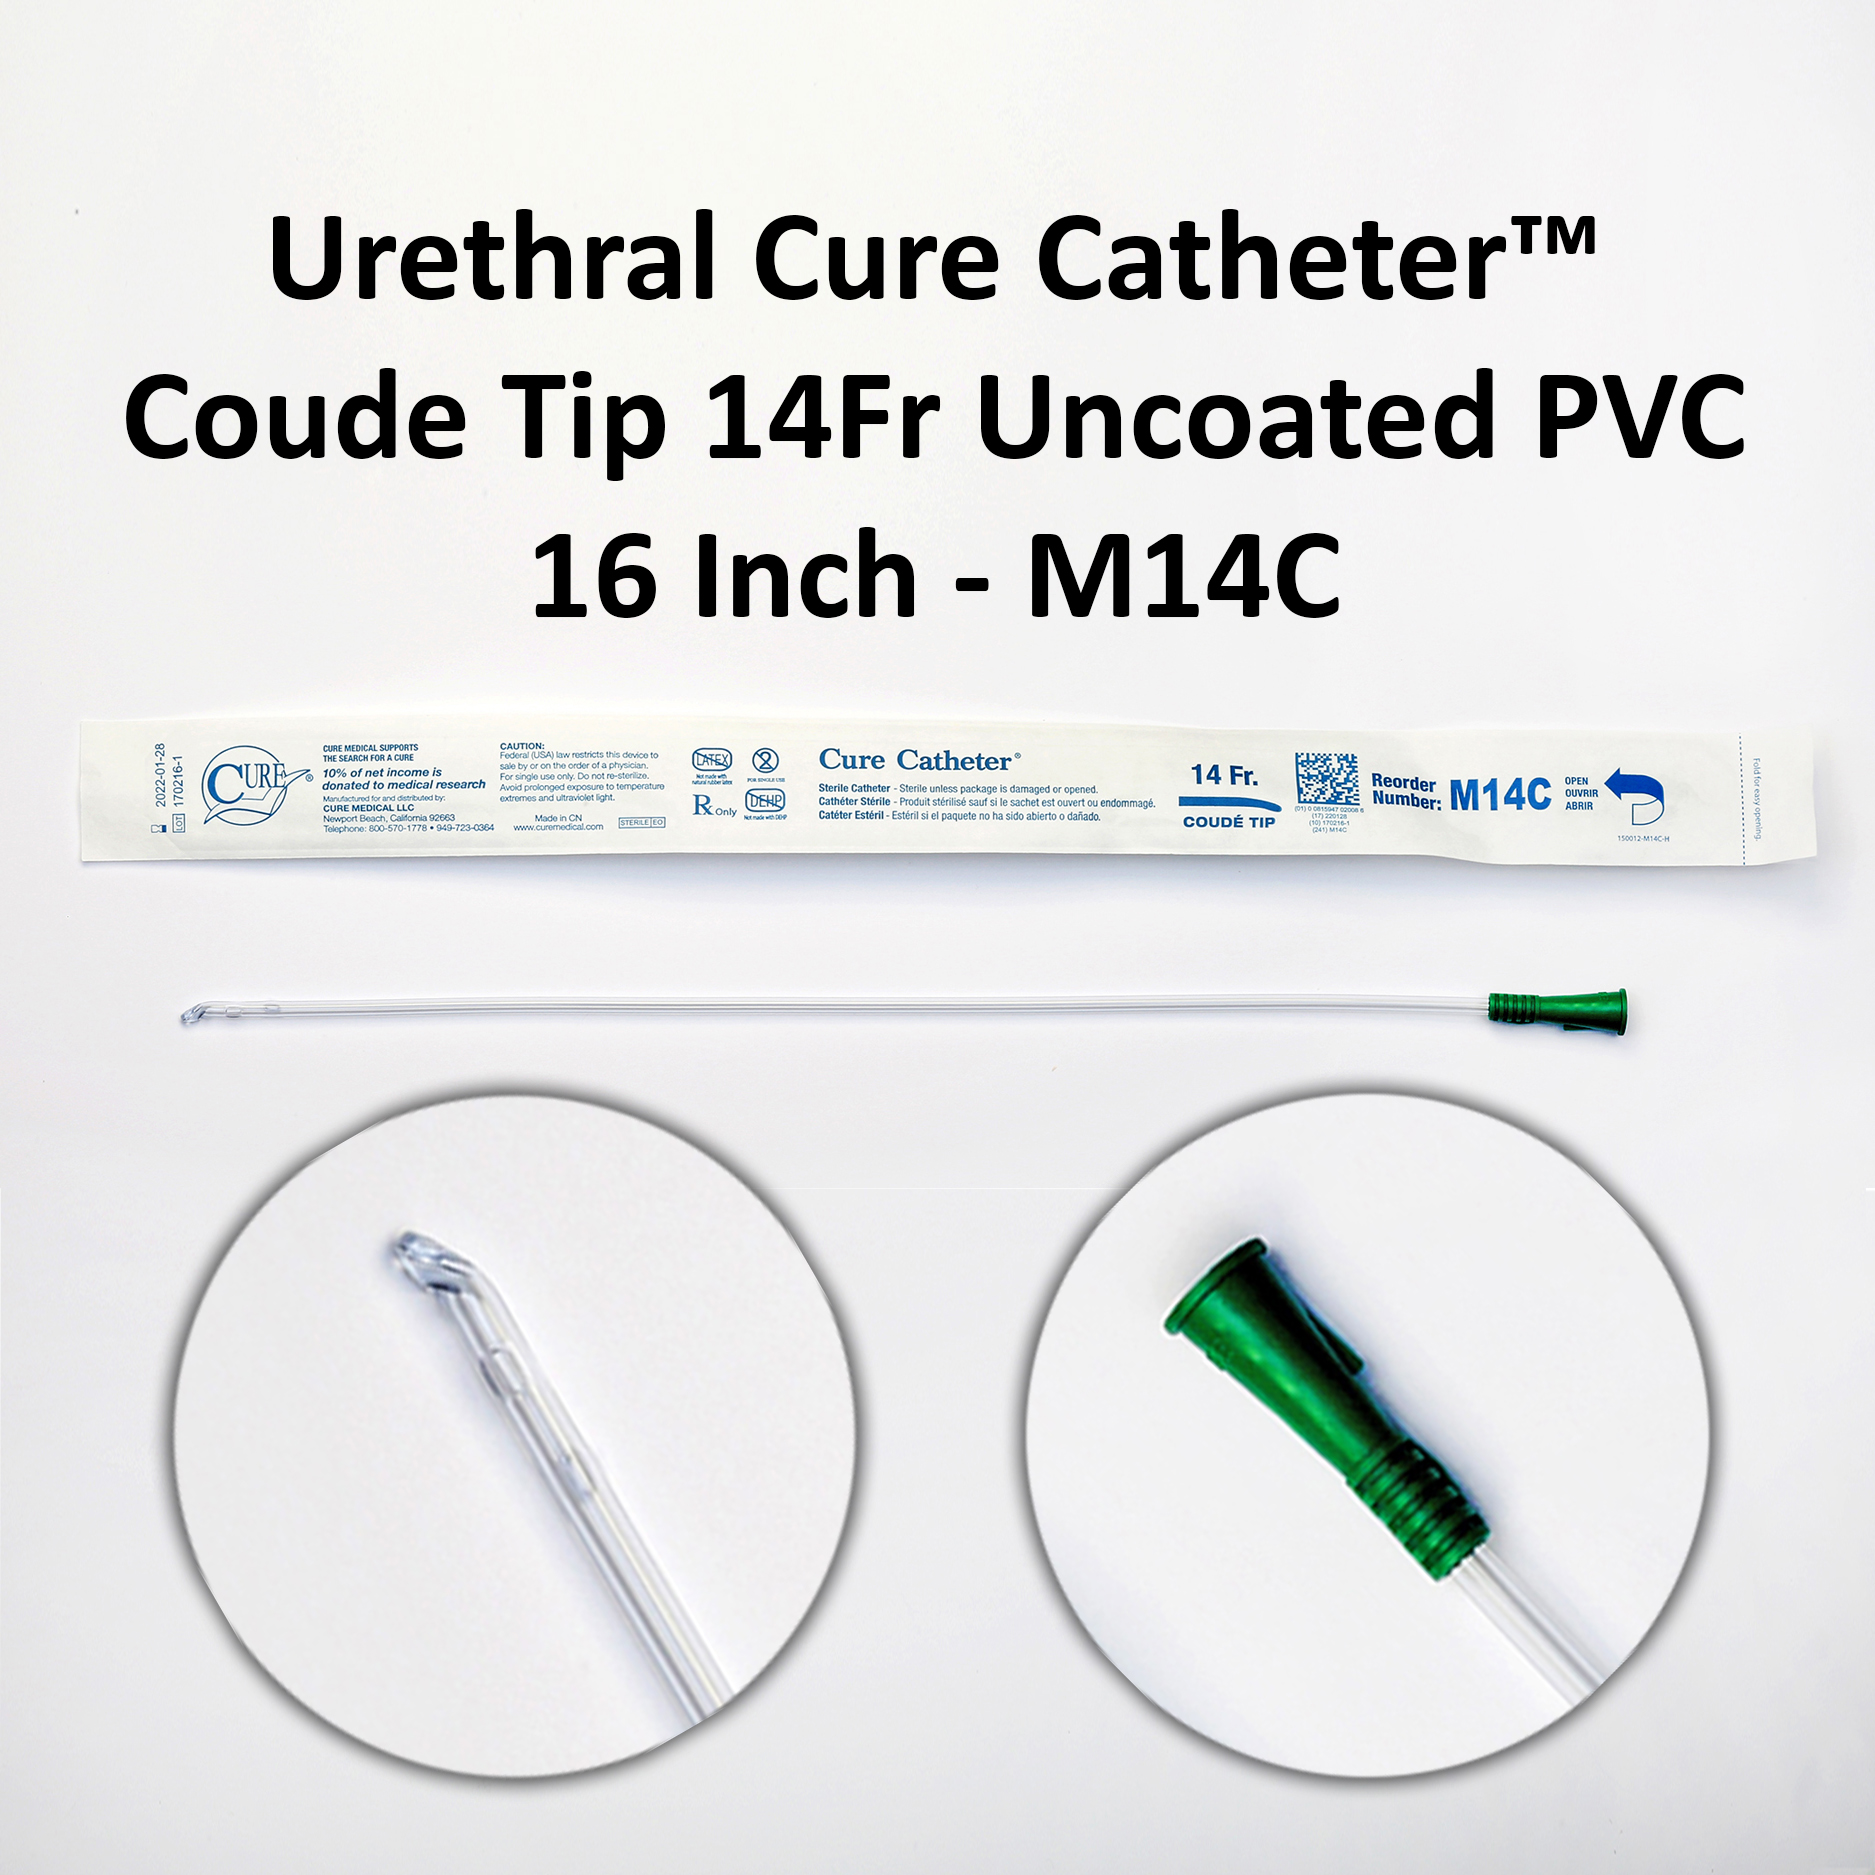 Urethral Cure Catheter™ Coude Tip 14Fr Uncoated PVC 16 Inch - M14C